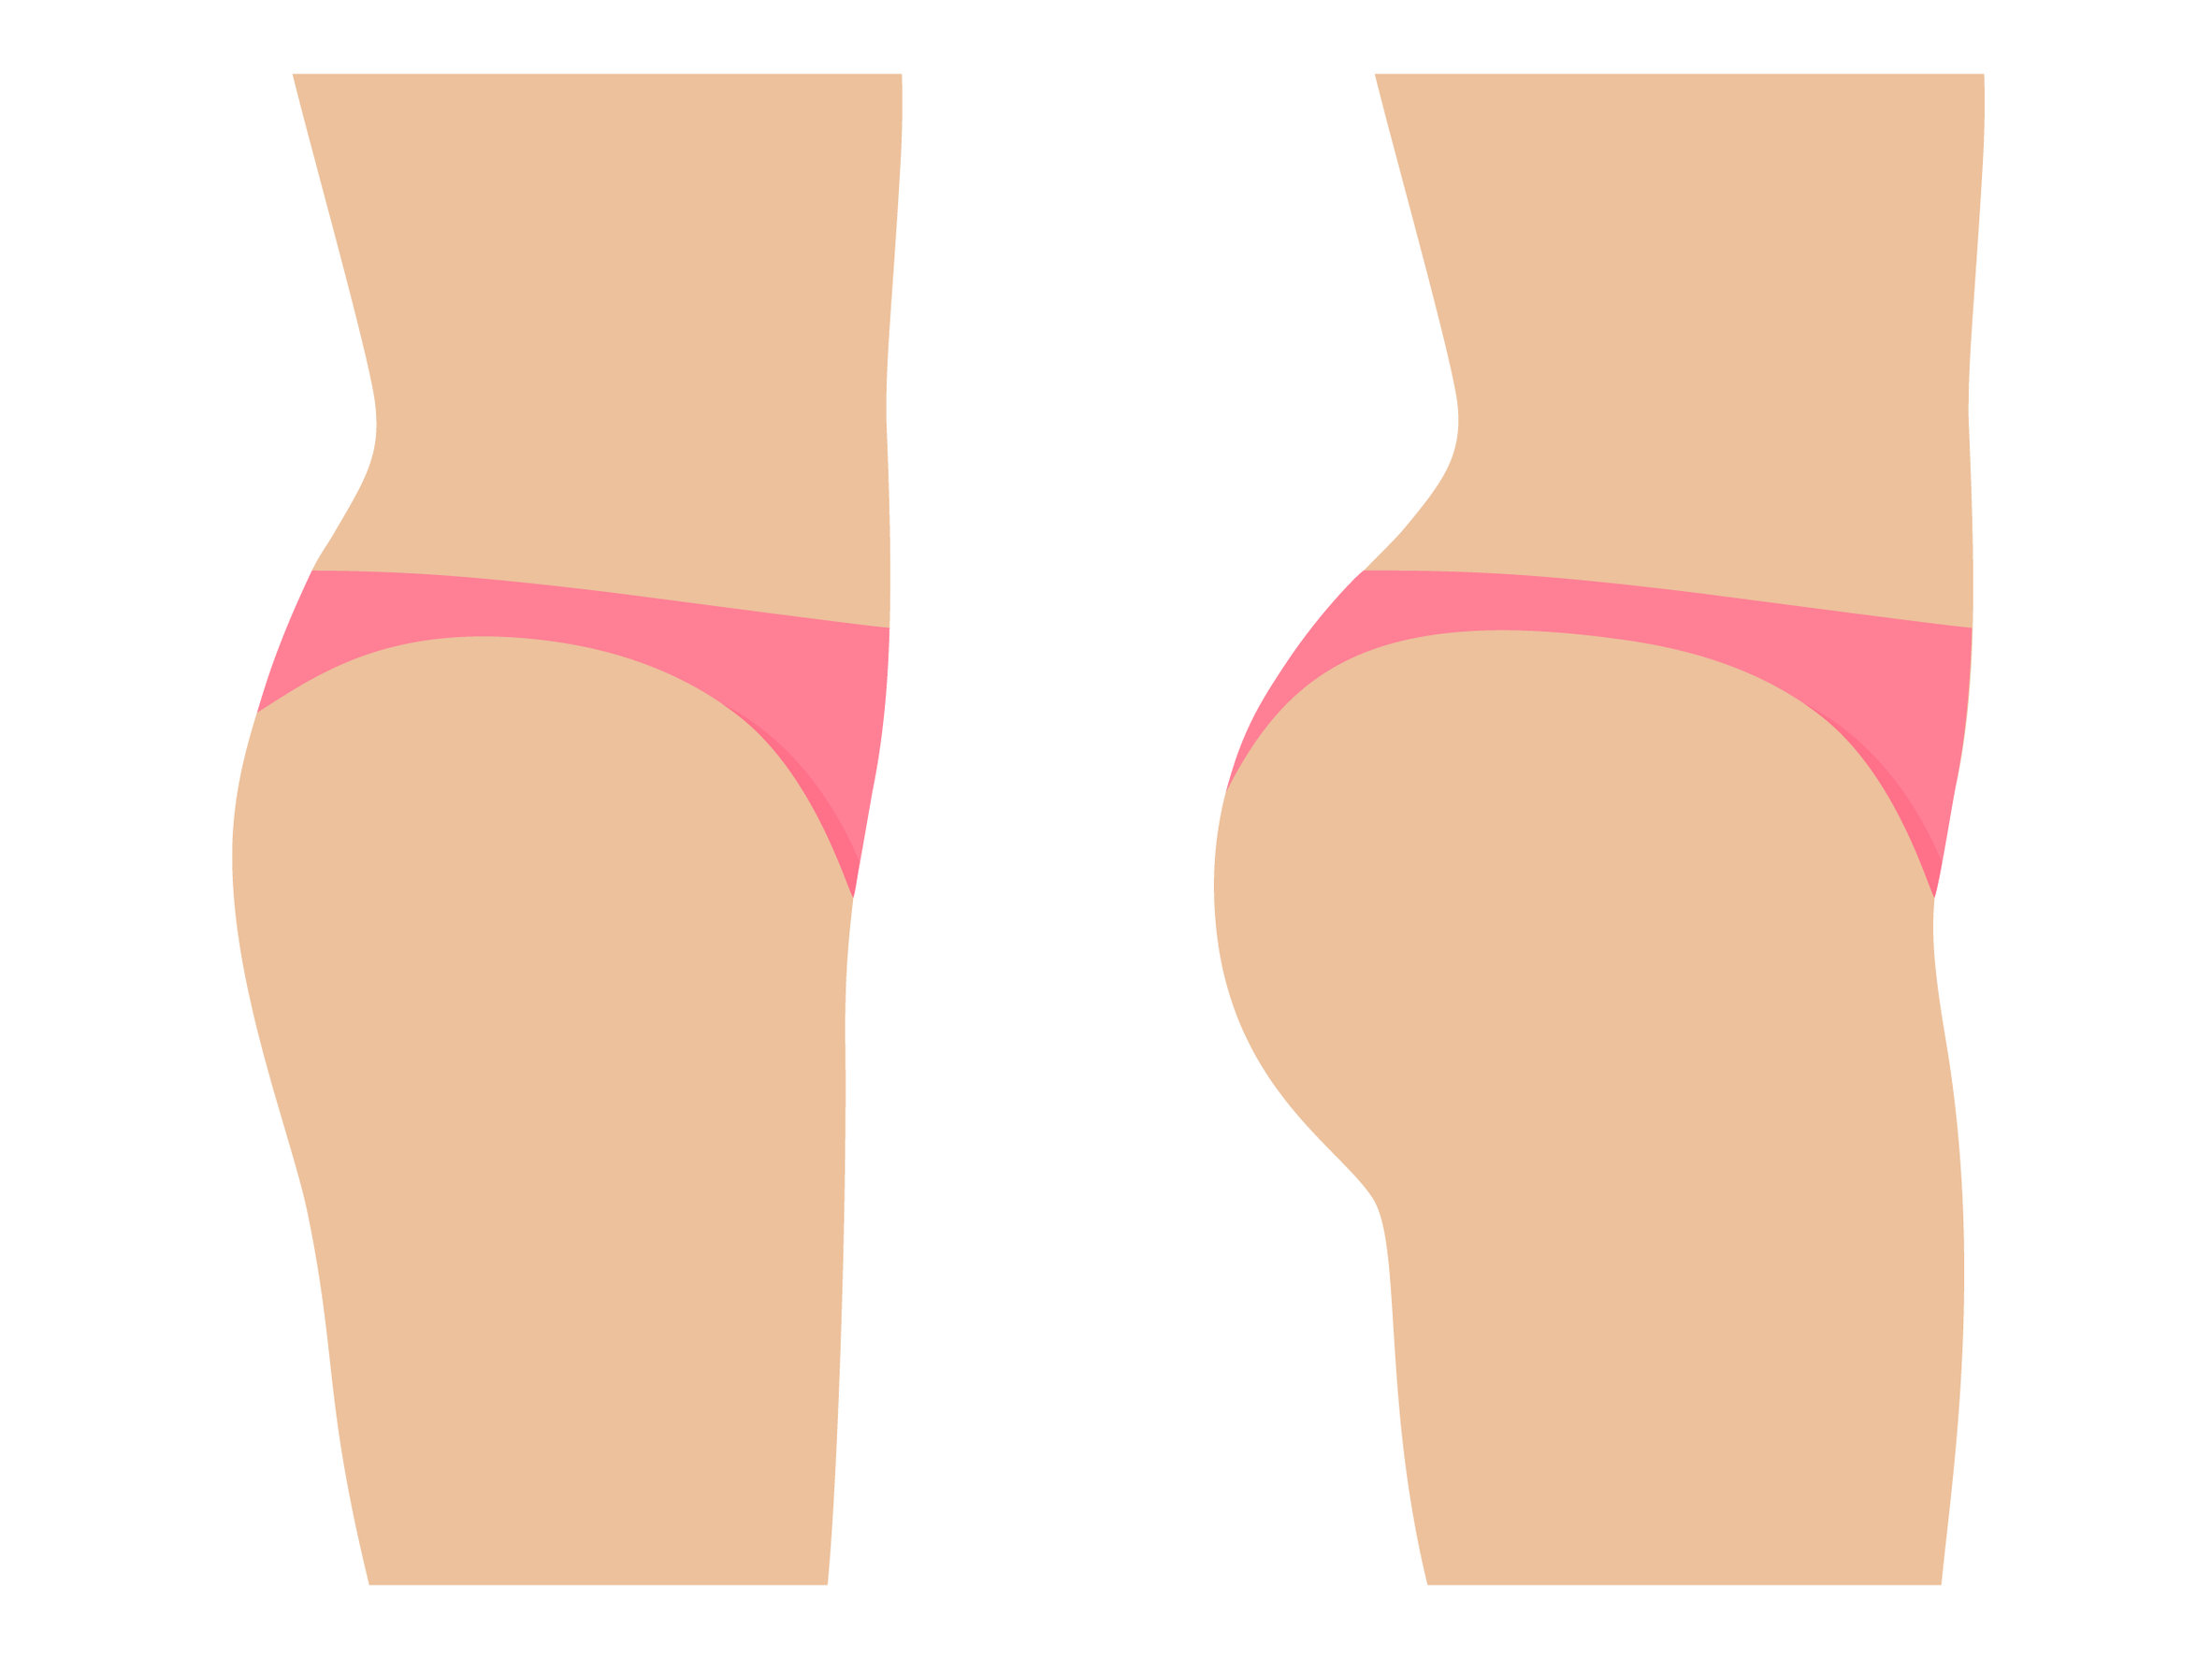 Everything you need to know about Gluteal Implants vs. Brazilian Butt Lift  Surgery